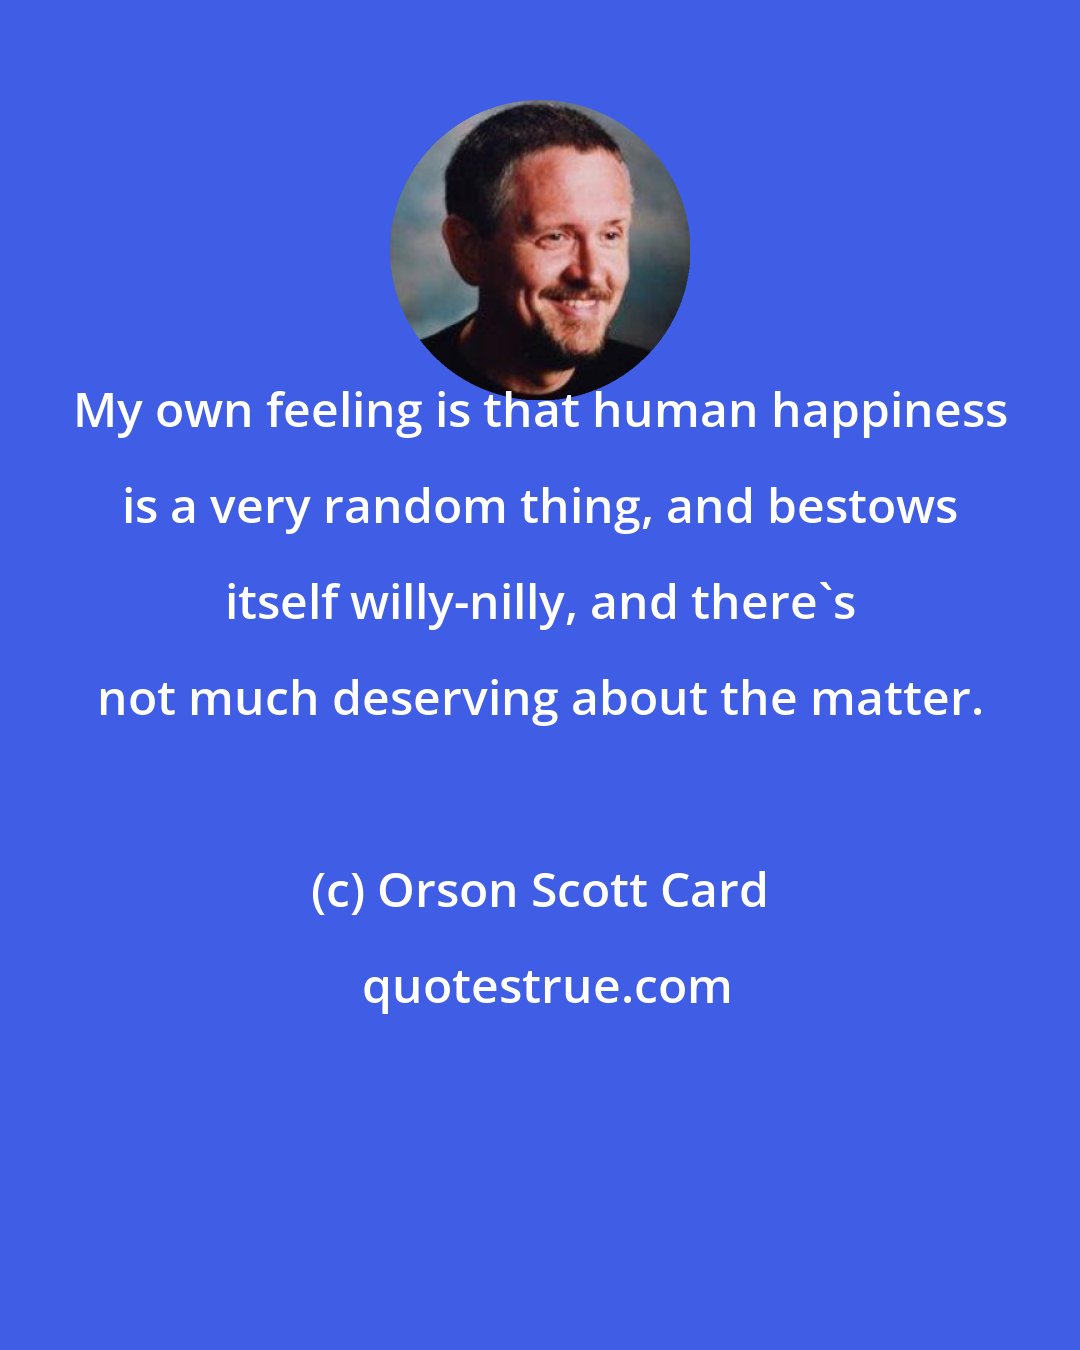 Orson Scott Card: My own feeling is that human happiness is a very random thing, and bestows itself willy-nilly, and there's not much deserving about the matter.